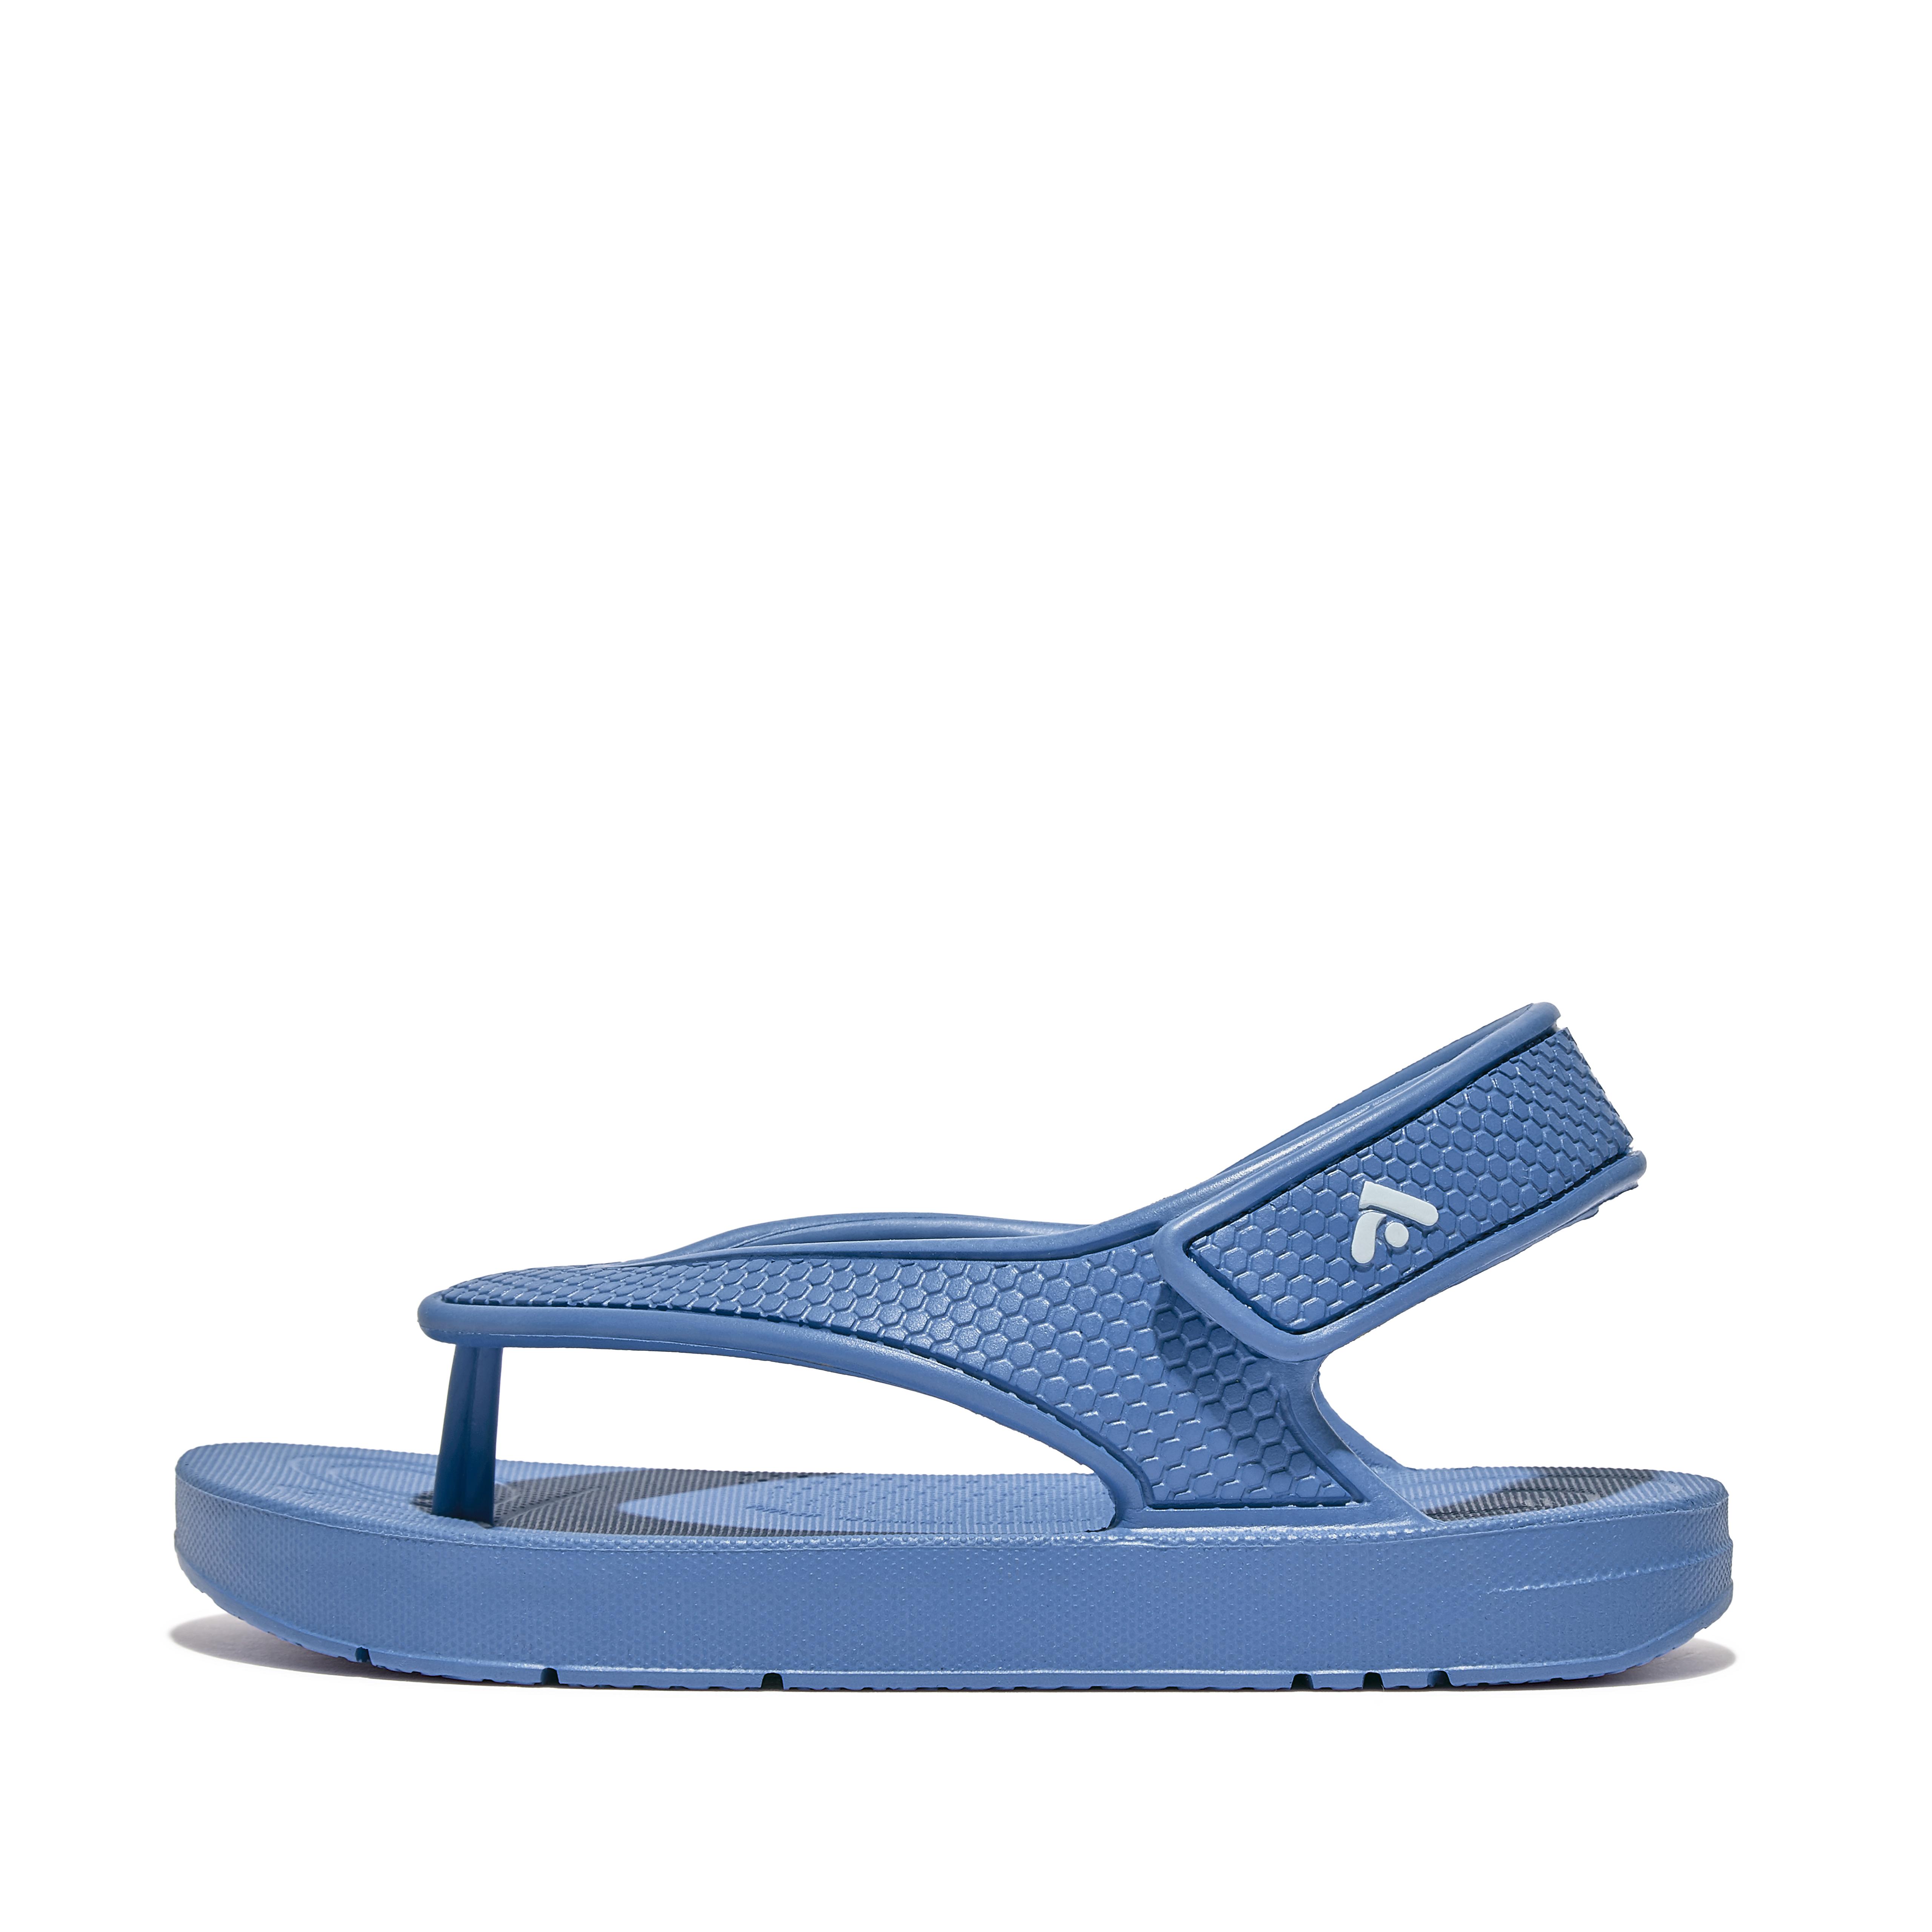 FitFlop iQUSHION Kids